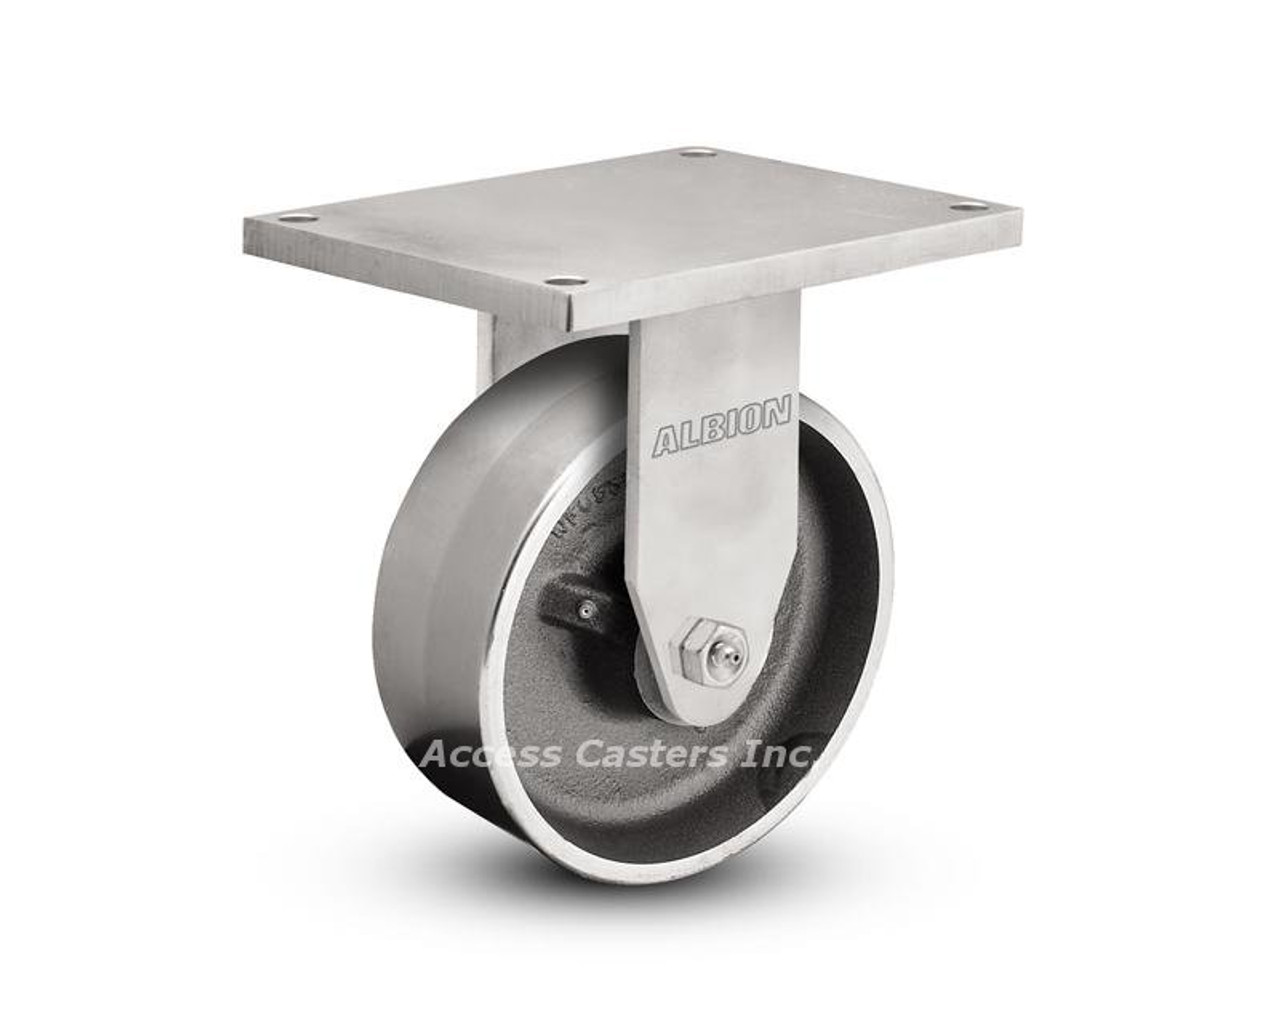 Picture shows caster with 10 Inch x 3 Inch wheel.